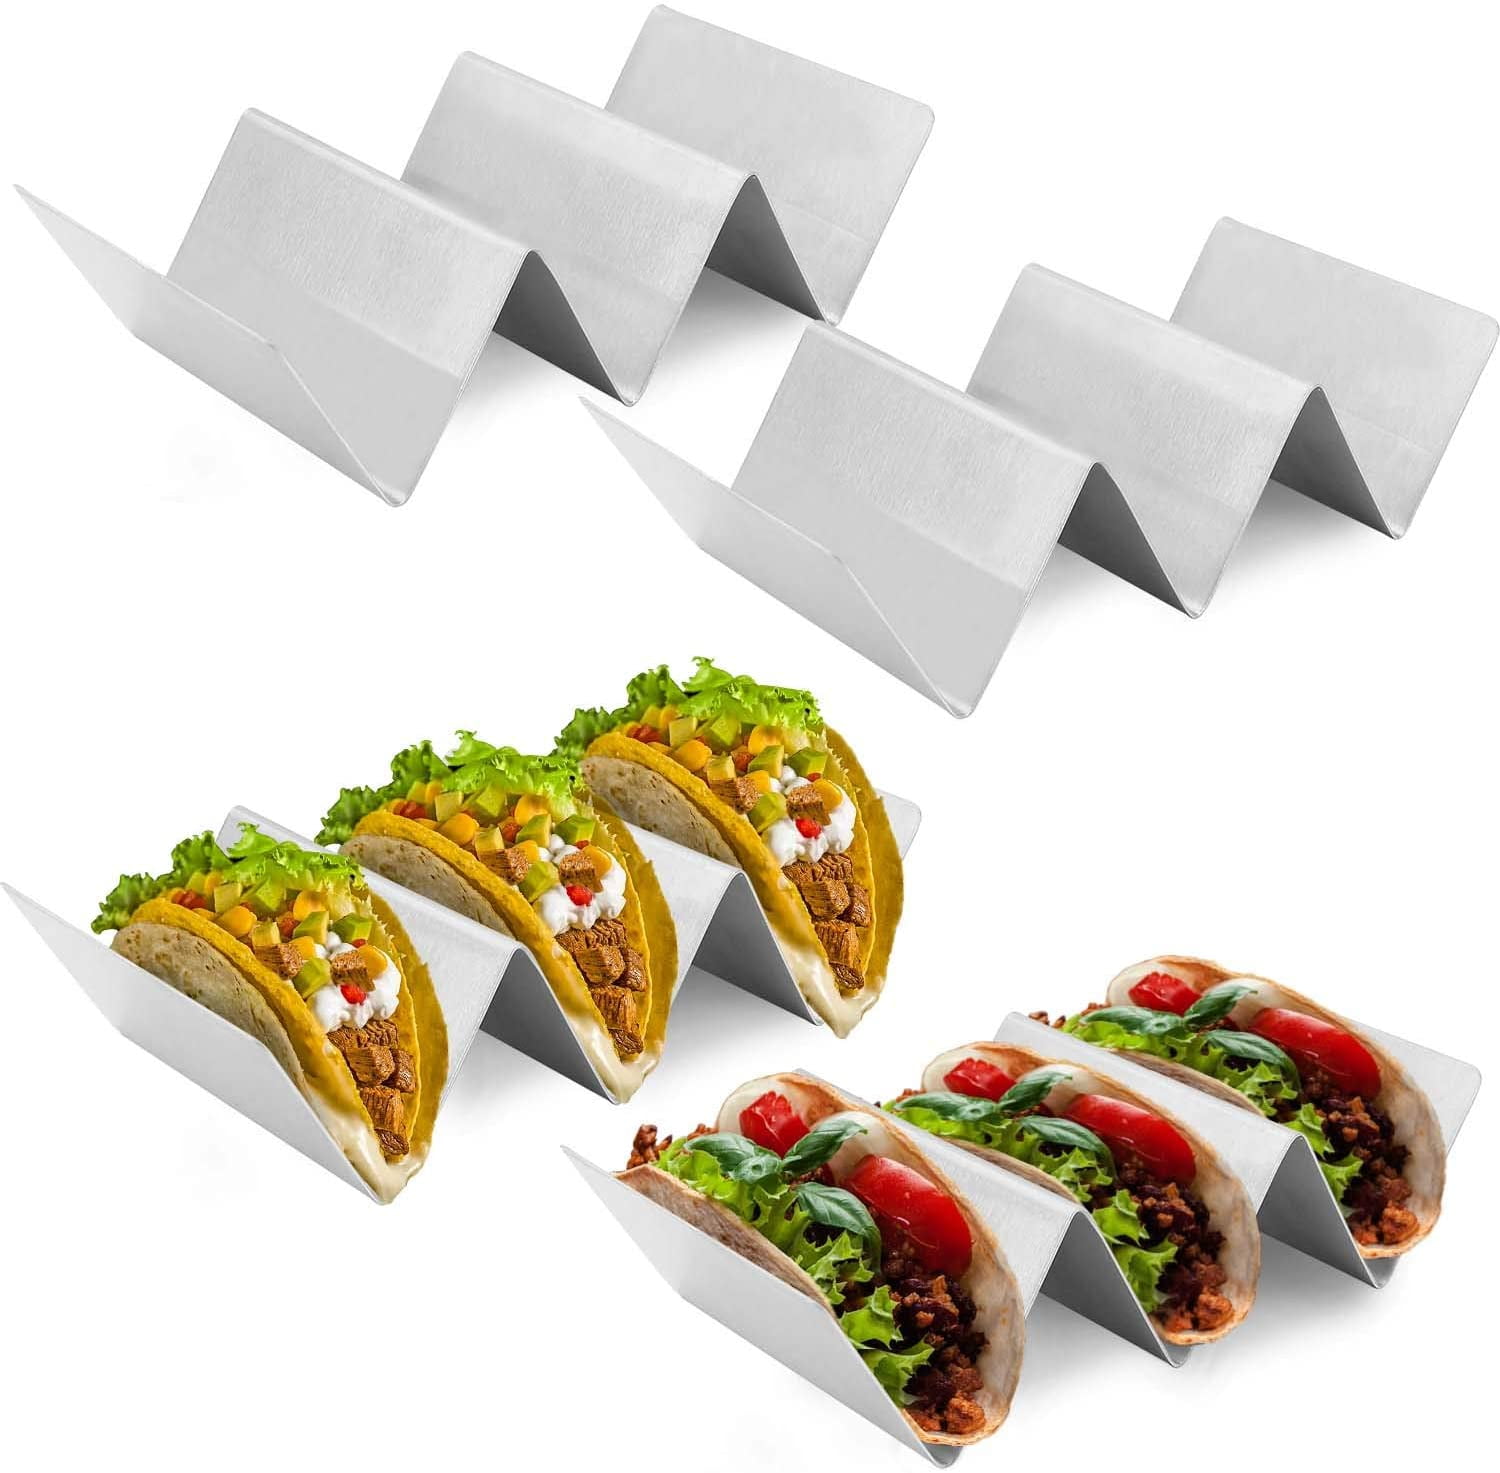 Taco Holders Stainless Steel Taco Stands- Oven & Dishwasher Safe Stackable Trays Racks Hold Soft & Hard Shell Tacos Silver, 3